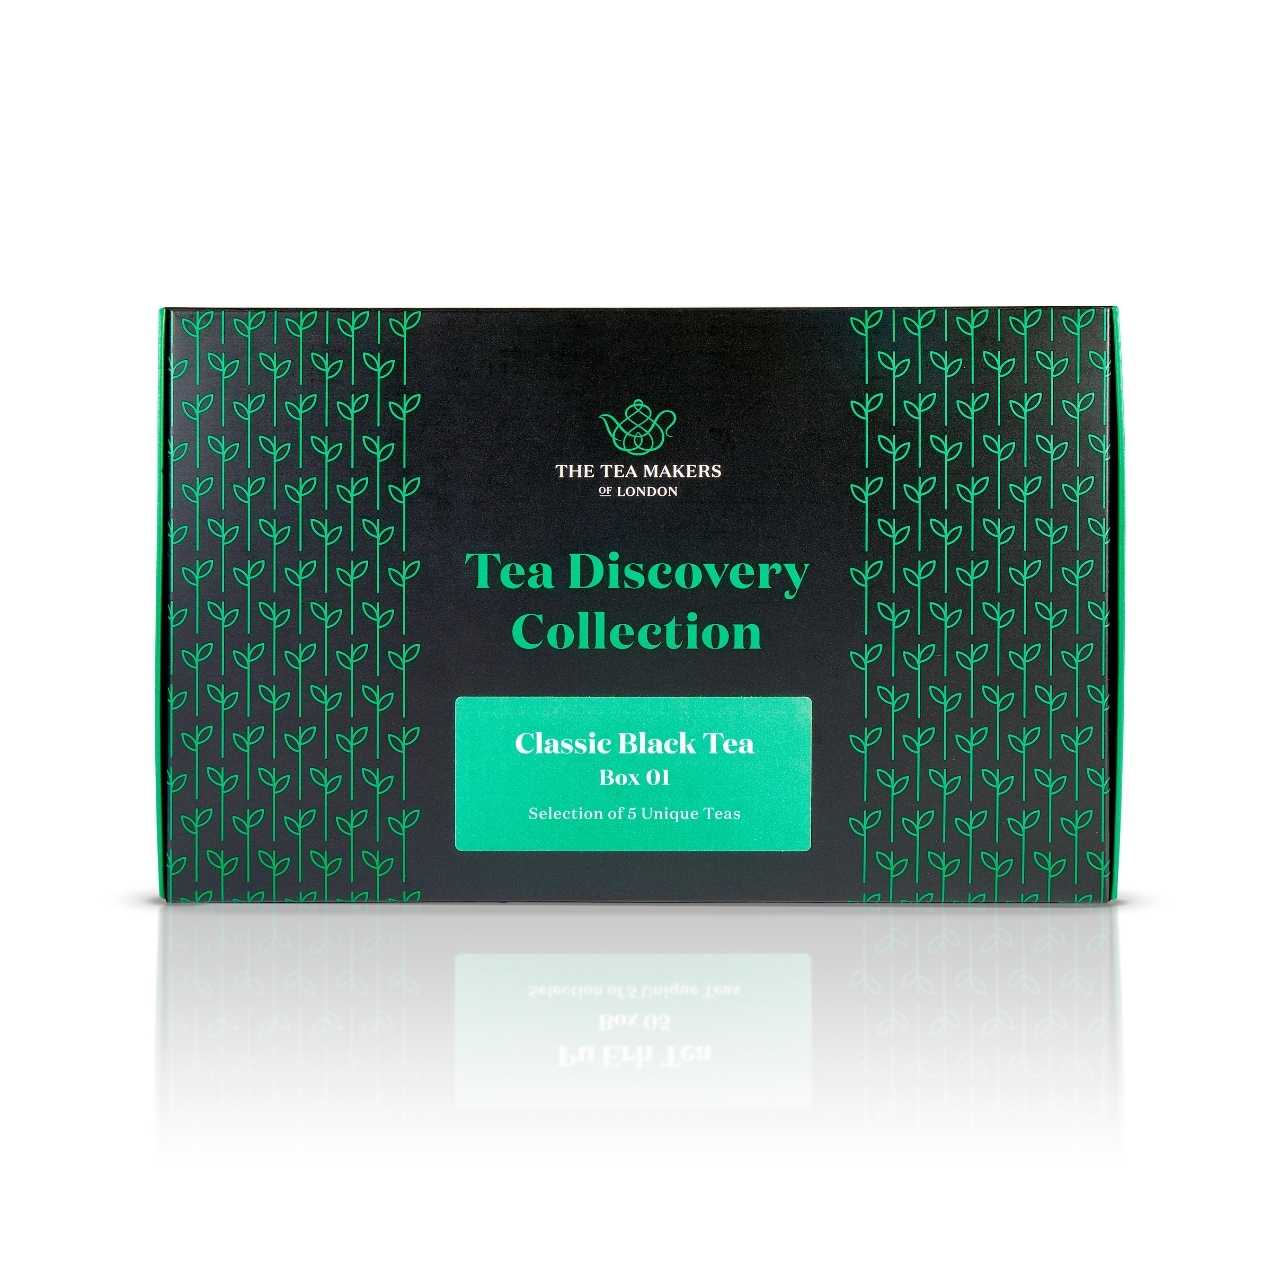 Classic Black Tea Collection outer box